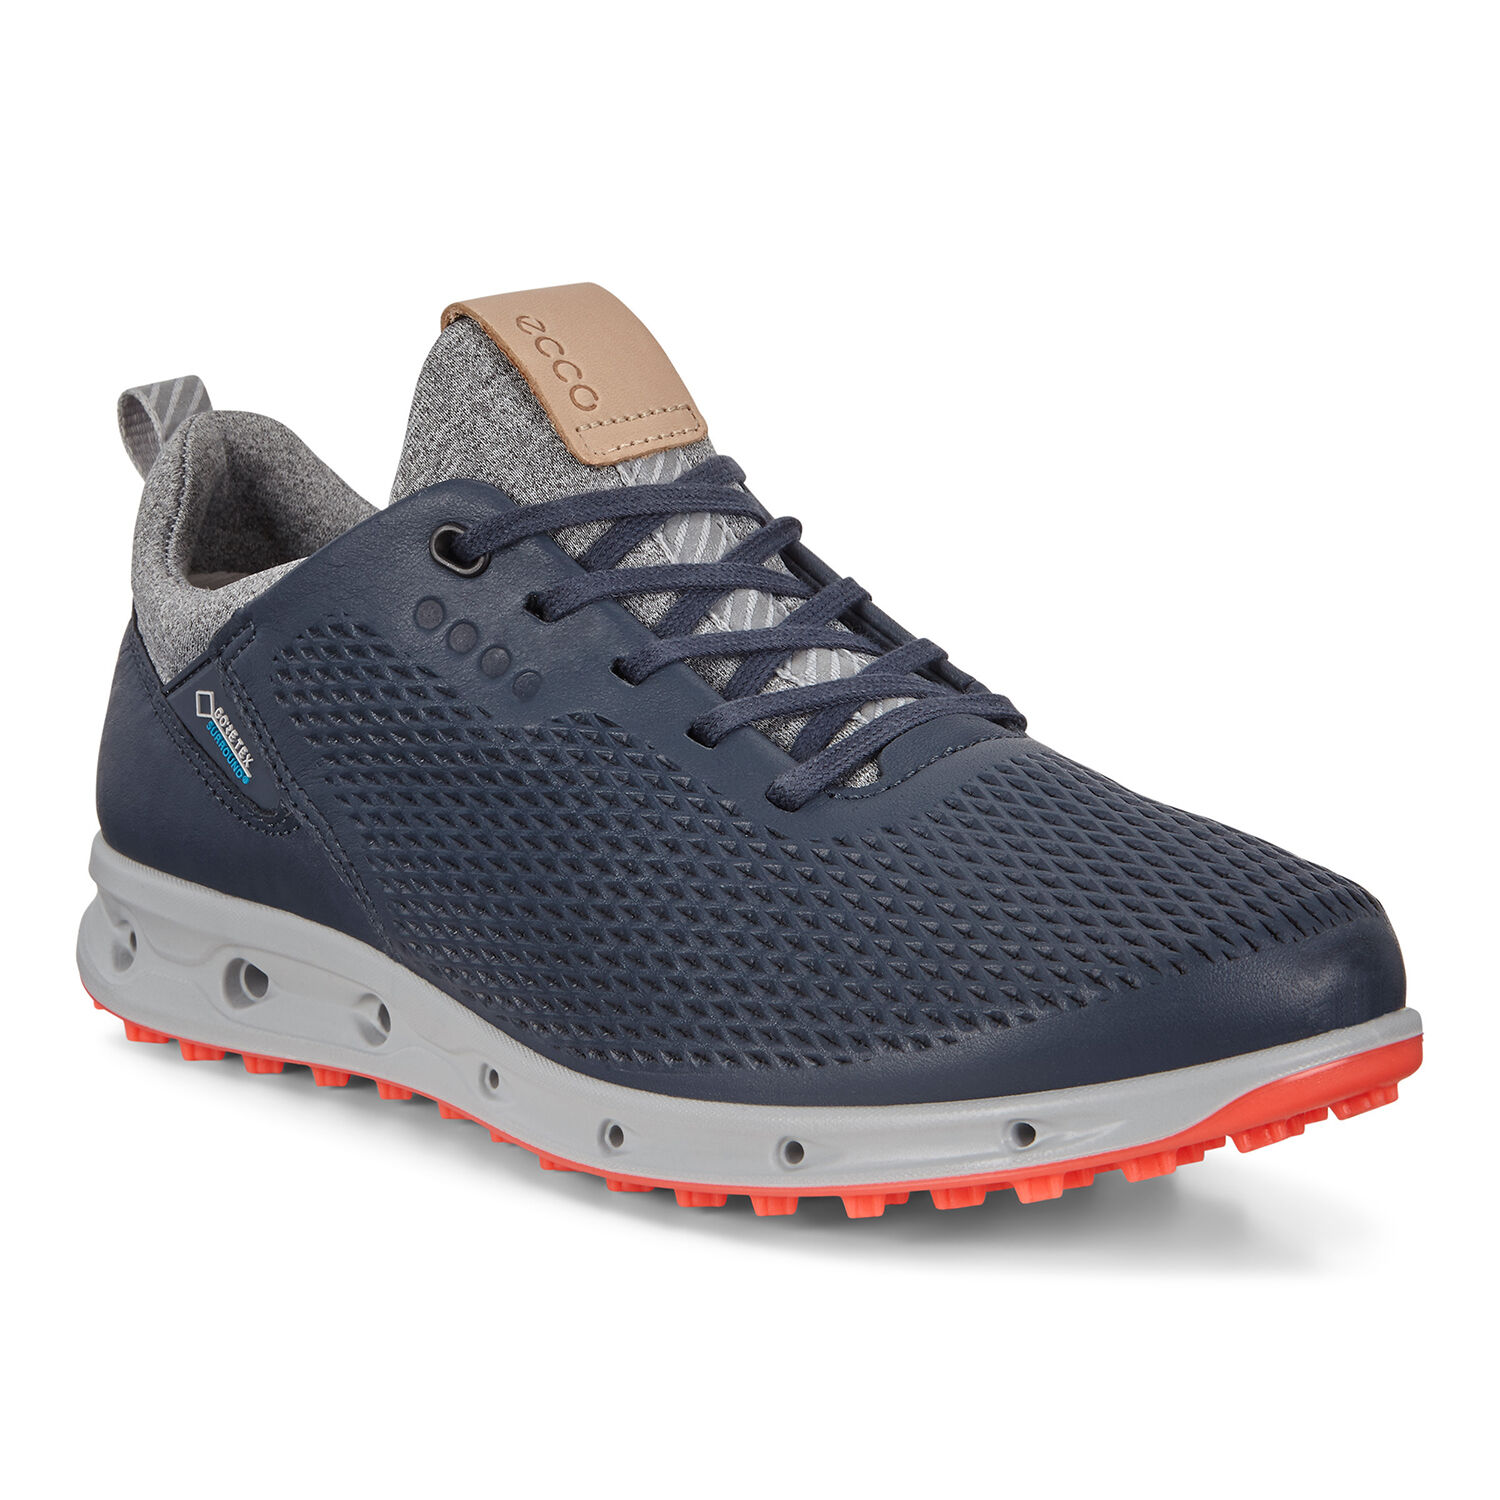 ecco golf shoes online store